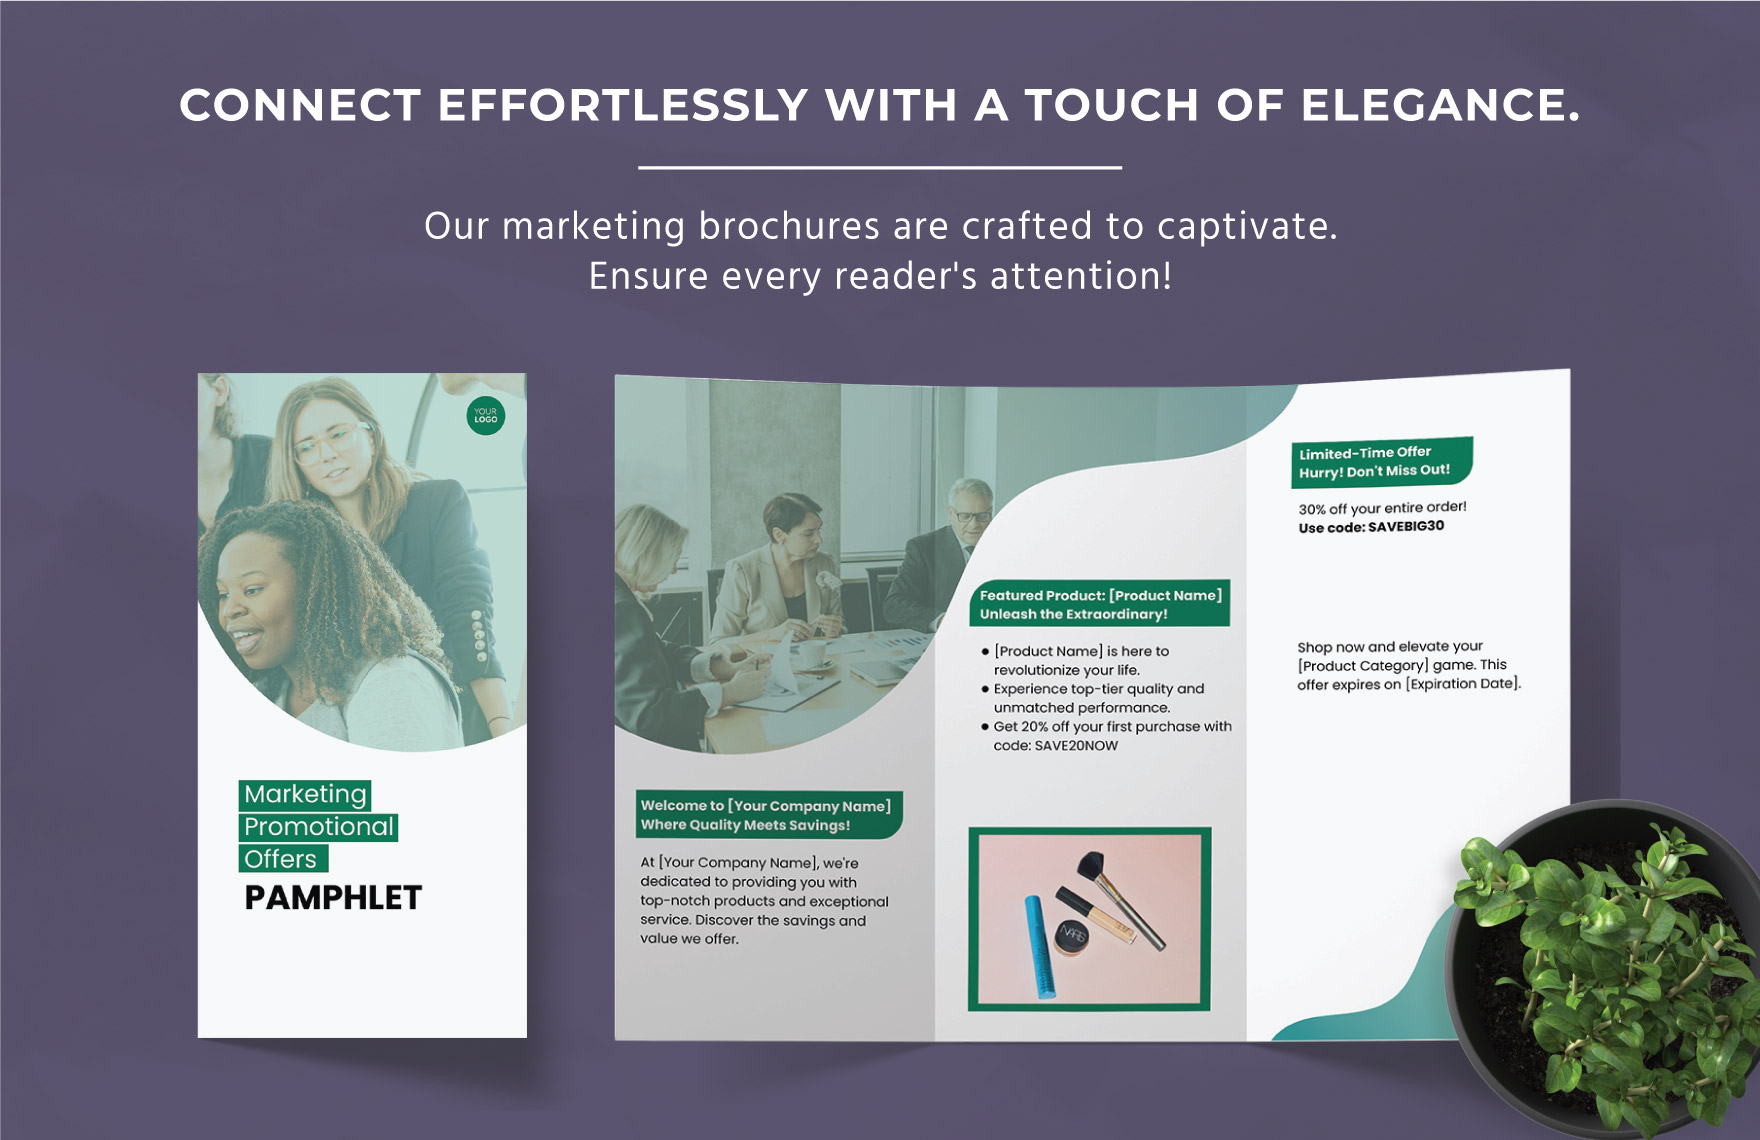 Marketing Promotional Offers Pamphlet Template